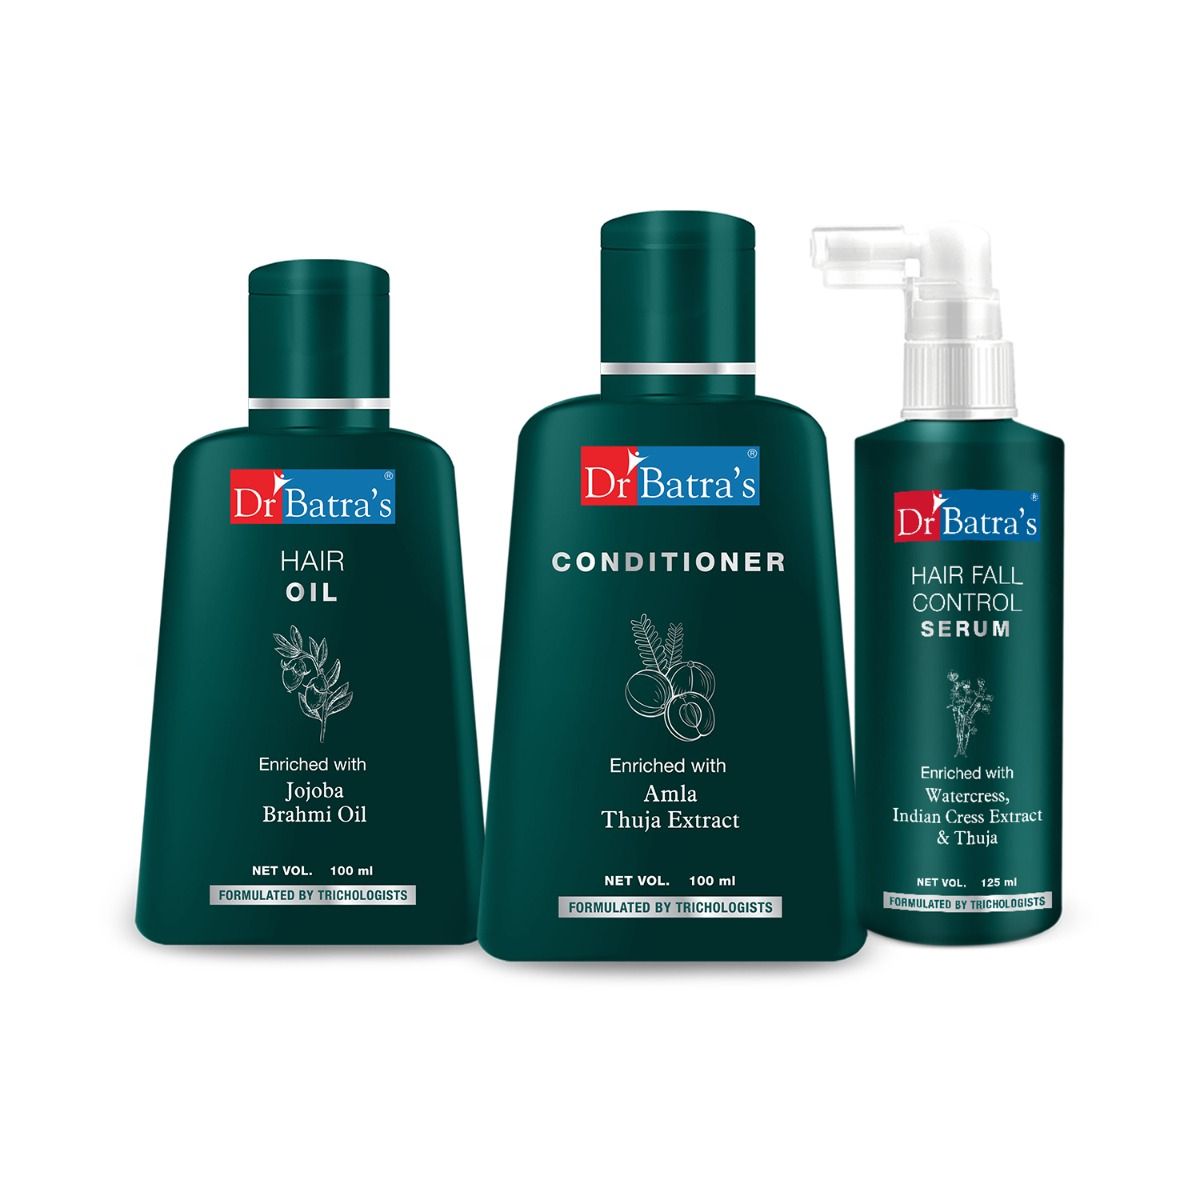     			Dr Batra's Hair Fall Control Serum-125 ml, Conditioner - 100 ml and Hair Oil - 100 ml (Pack of 3)